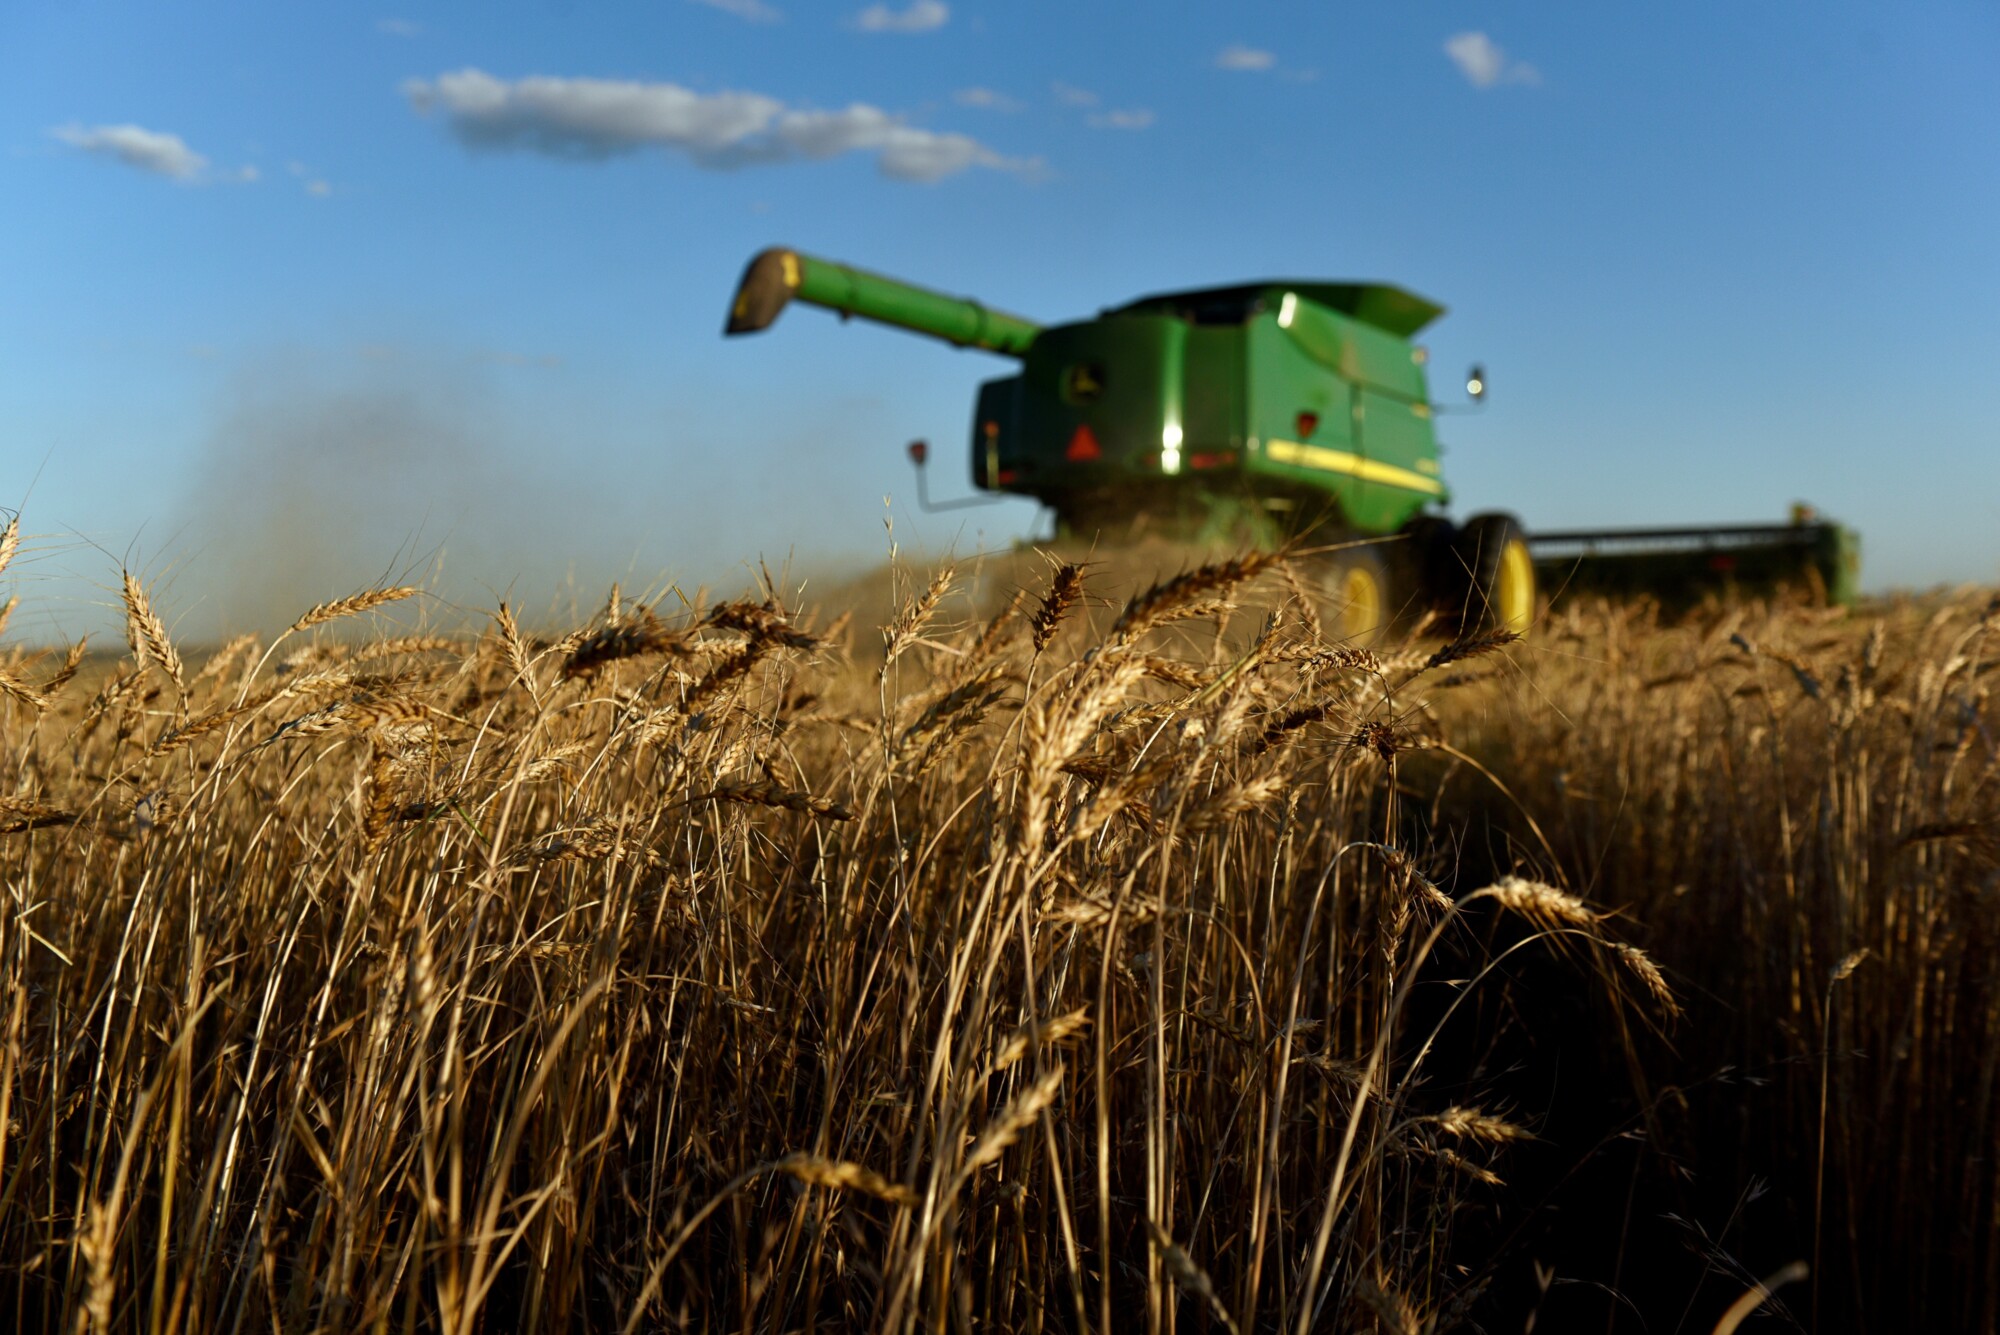 US White Wheat Growers Cash In As China Snaps Up Supplies